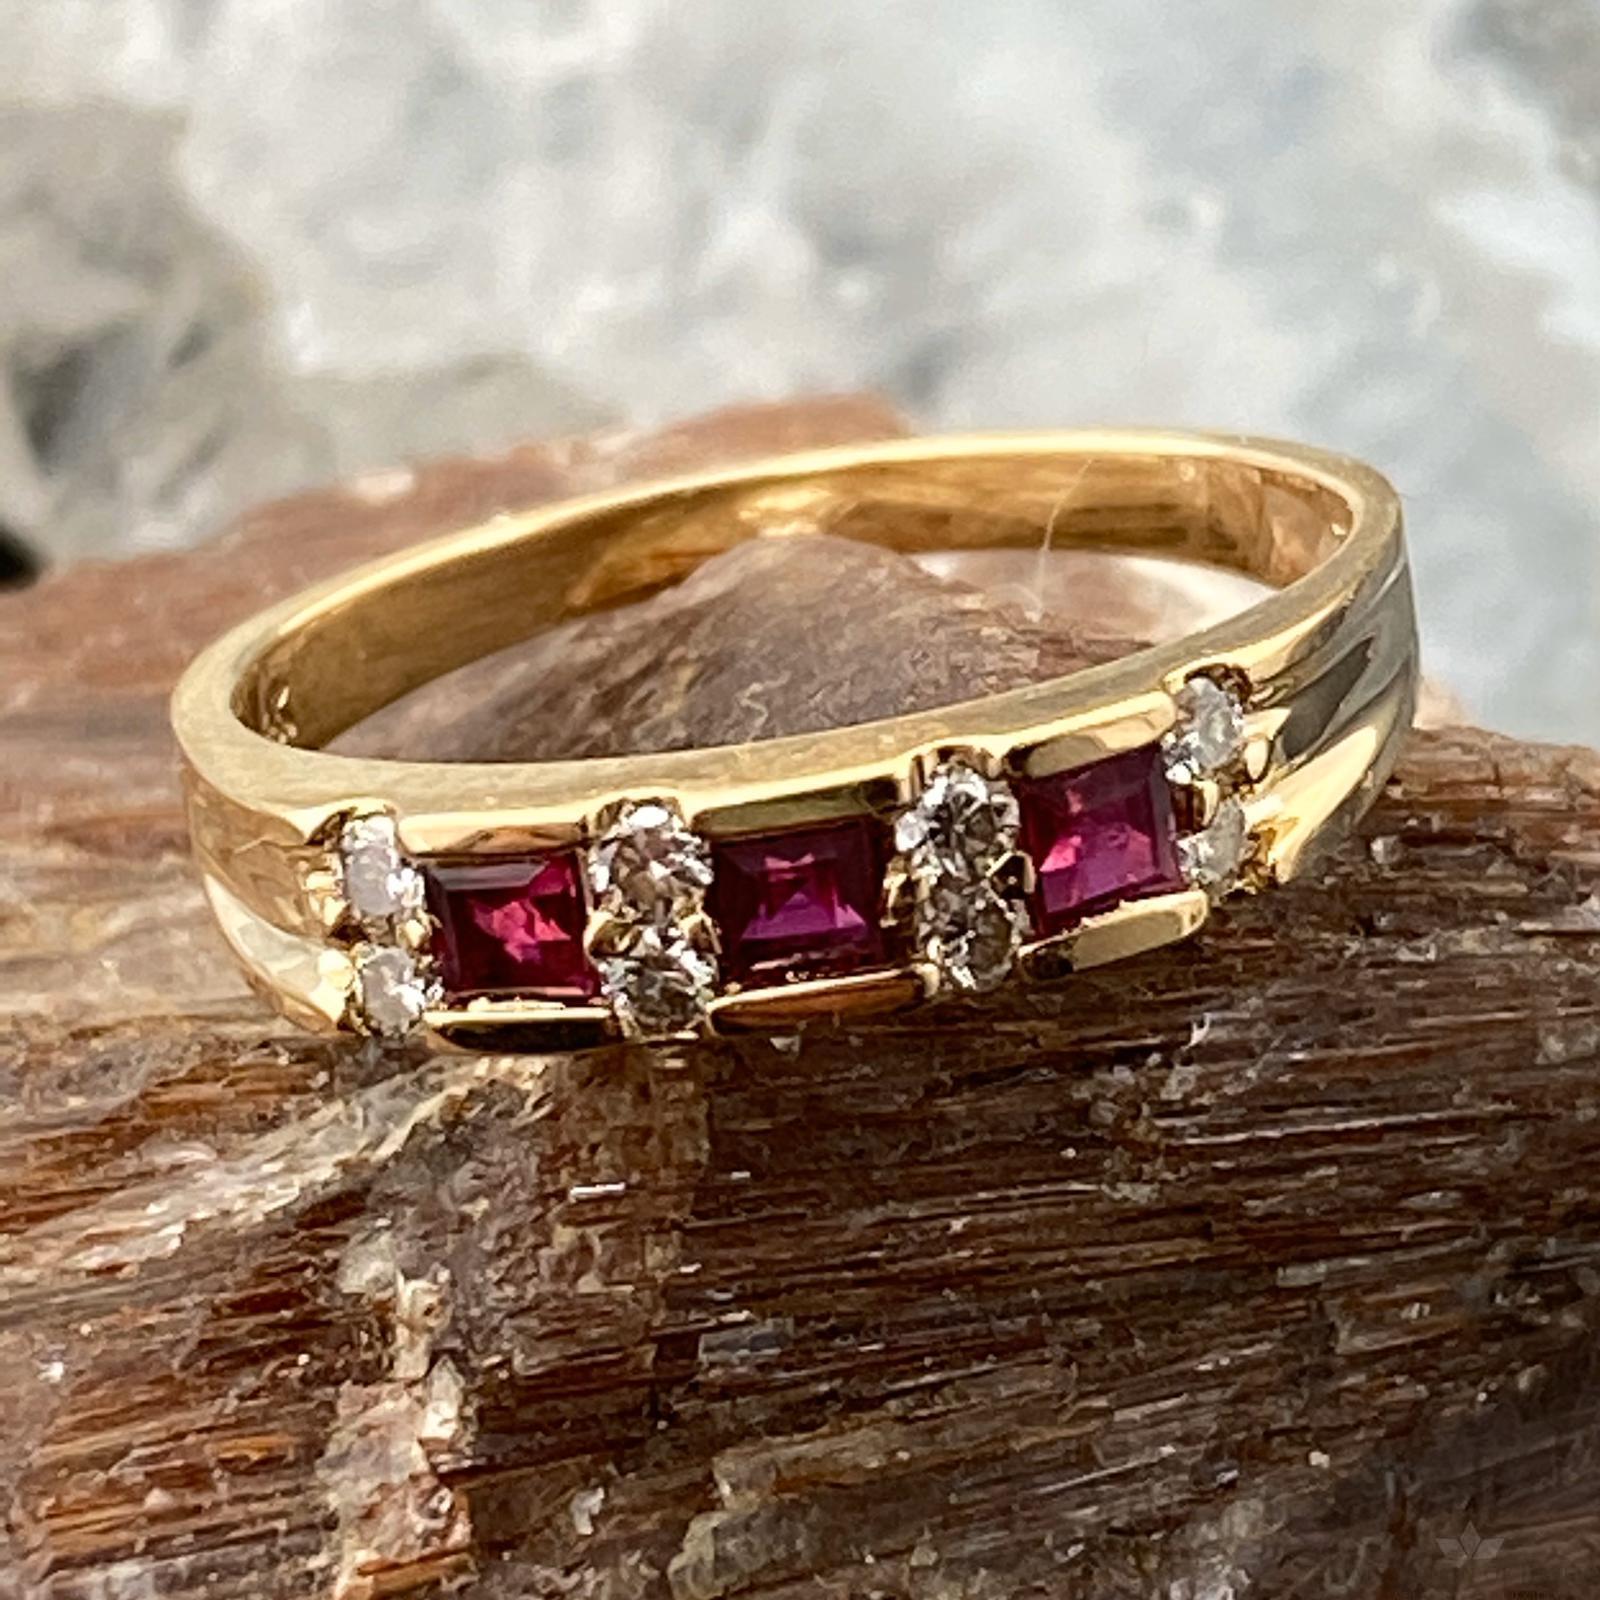 14K Yellow Gold Rubies and Diamonds Band Ring Size 6.25 For Bridal | eBay